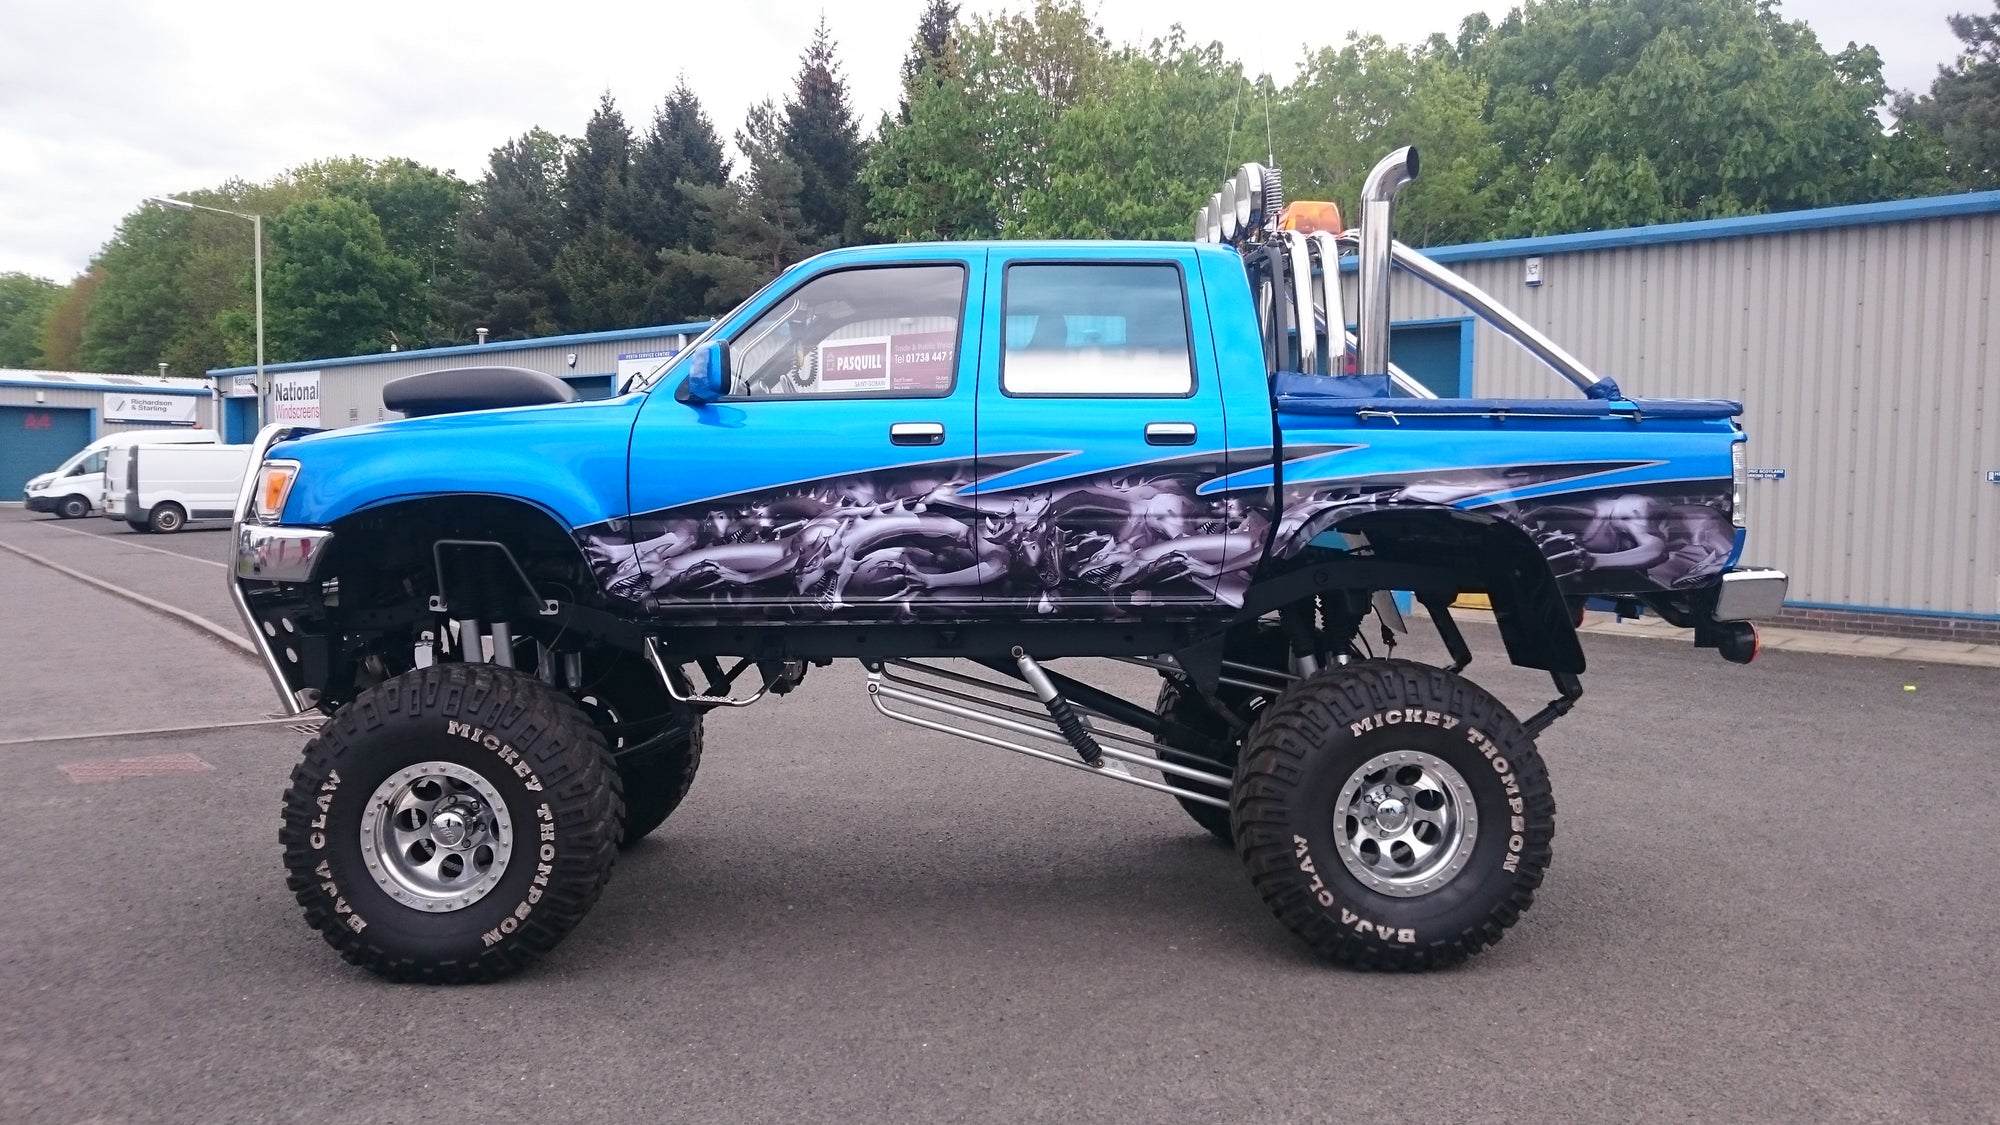 Dragons checkered flag wave half wrap on a Toyota Hilux monster truck